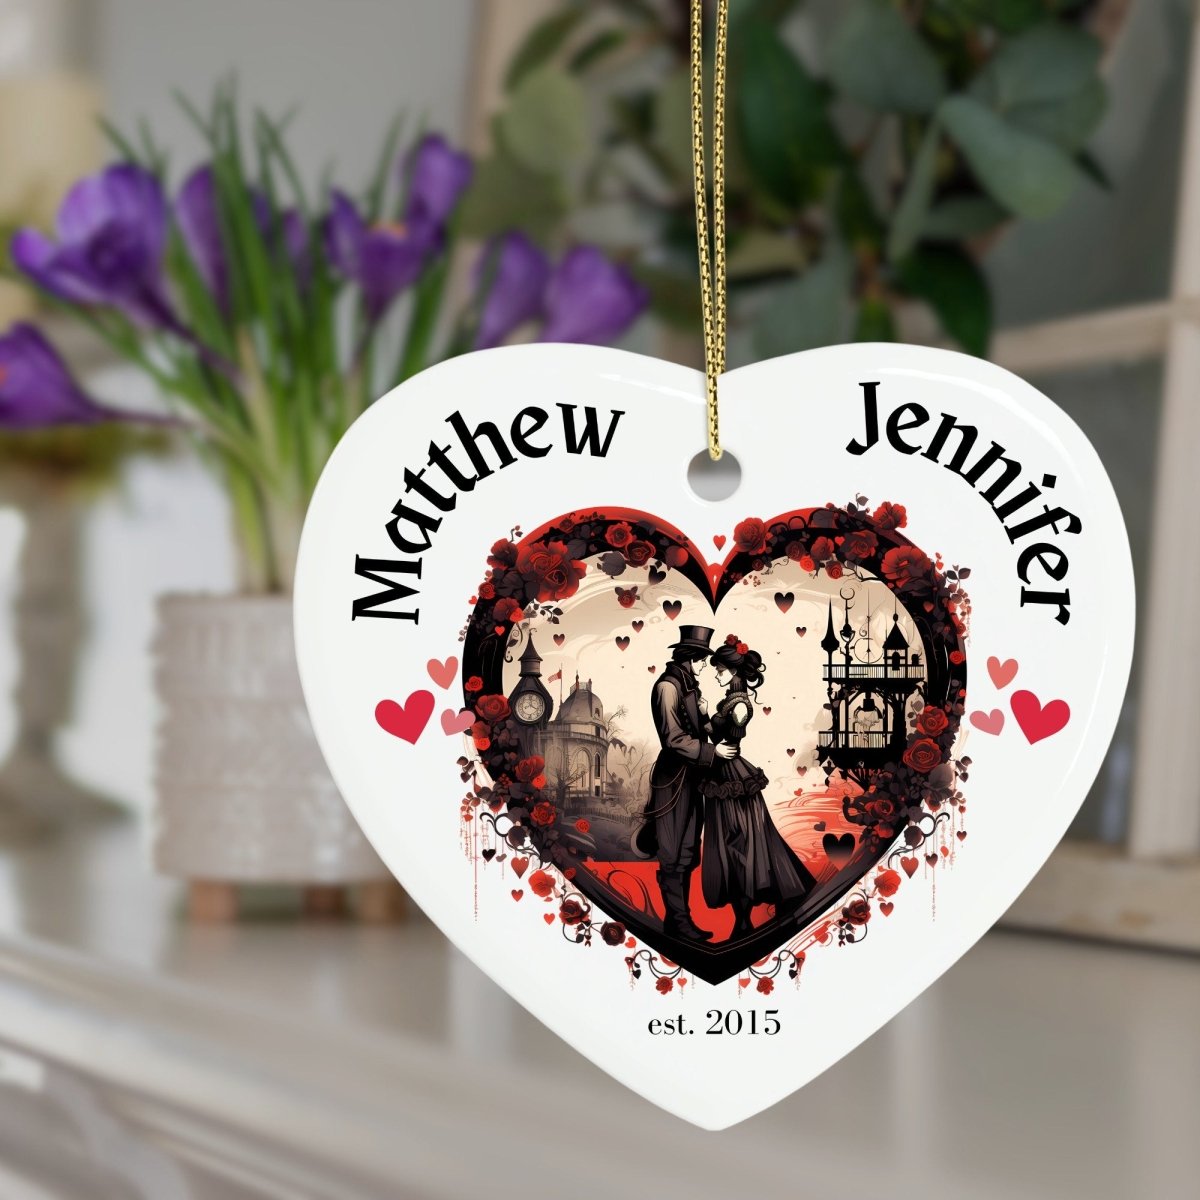 Cute personalised Victorian Couple Ornament Ceramic Heart Ornament Lovers Keepsake Valentines Day Gift Anniversary Gift Idea for Soulmates - Everything Pixel